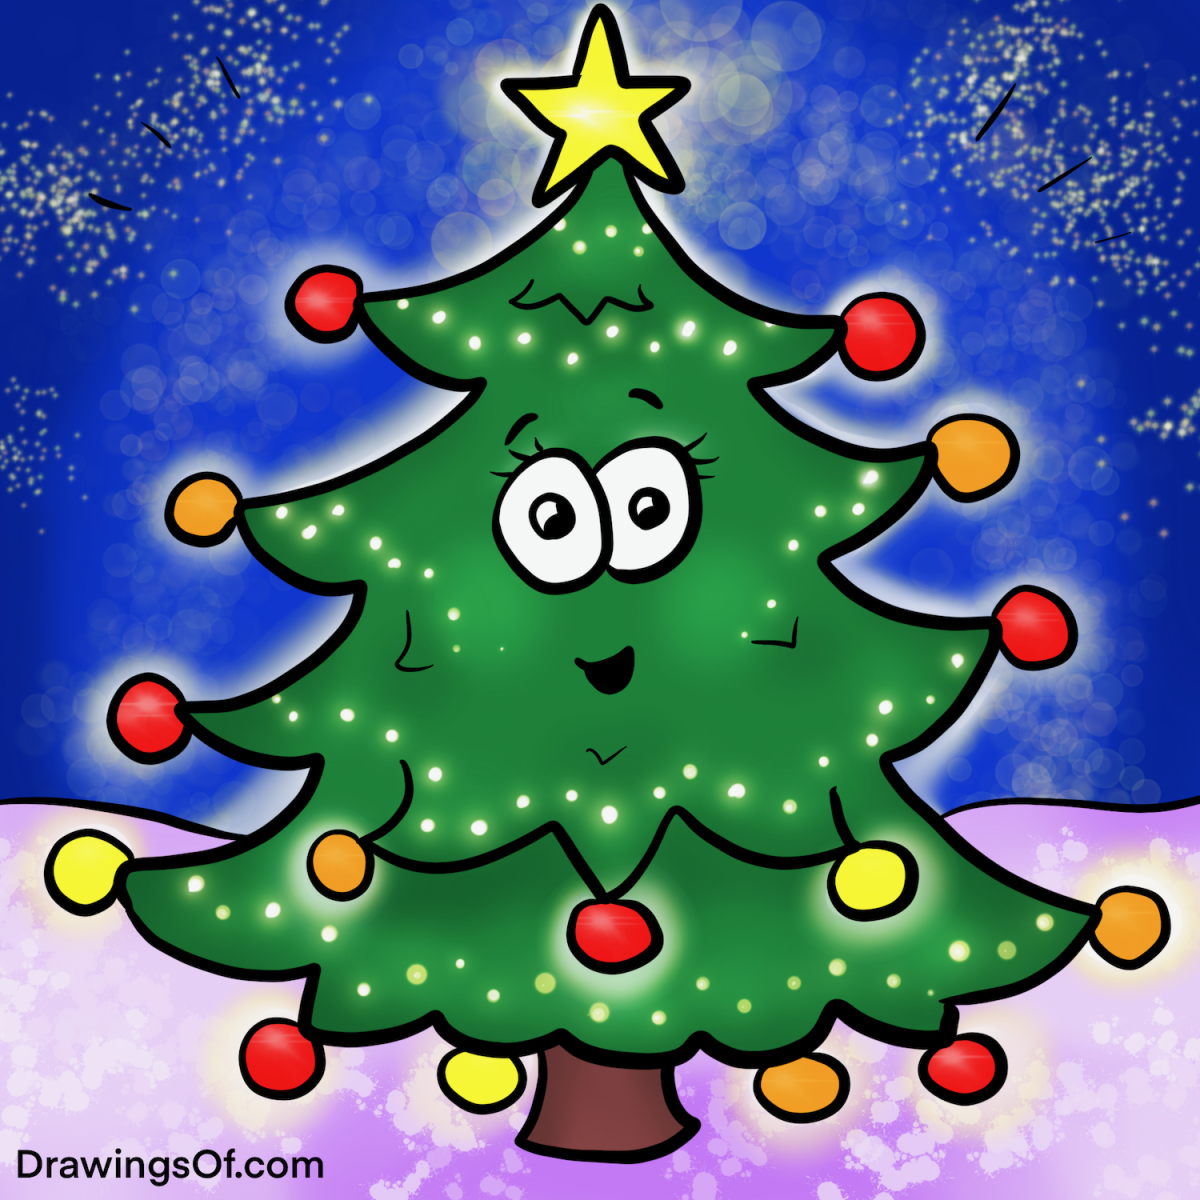 How to Draw a Christmas Tree cute and easy | Easy drawings for kids-saigonsouth.com.vn